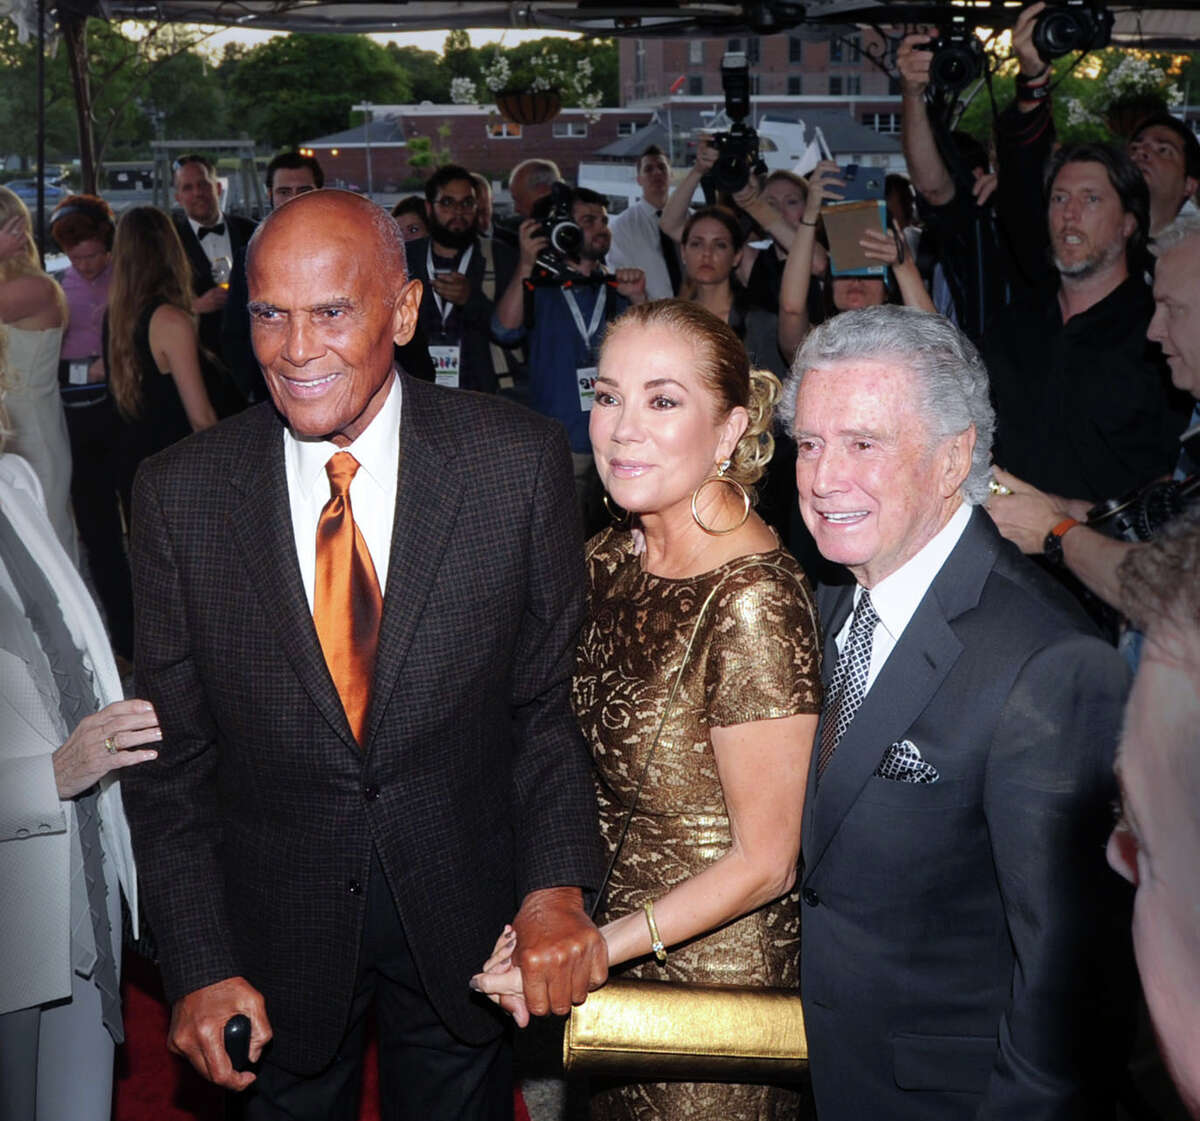 Honoree Harry Belafonte, left, with Kathie Lee Gifford, center, and Regis Philbin, right during the Greenwich International Film Festival Gala honoring Belafonte for his philanthropic work, particularly with UNICEF, at L'escale Restaurant & Bar in Greenwich, Conn., Saturday night, June 6, 2015. Gifford and Philbin were Master of Ceremonies for the gala.